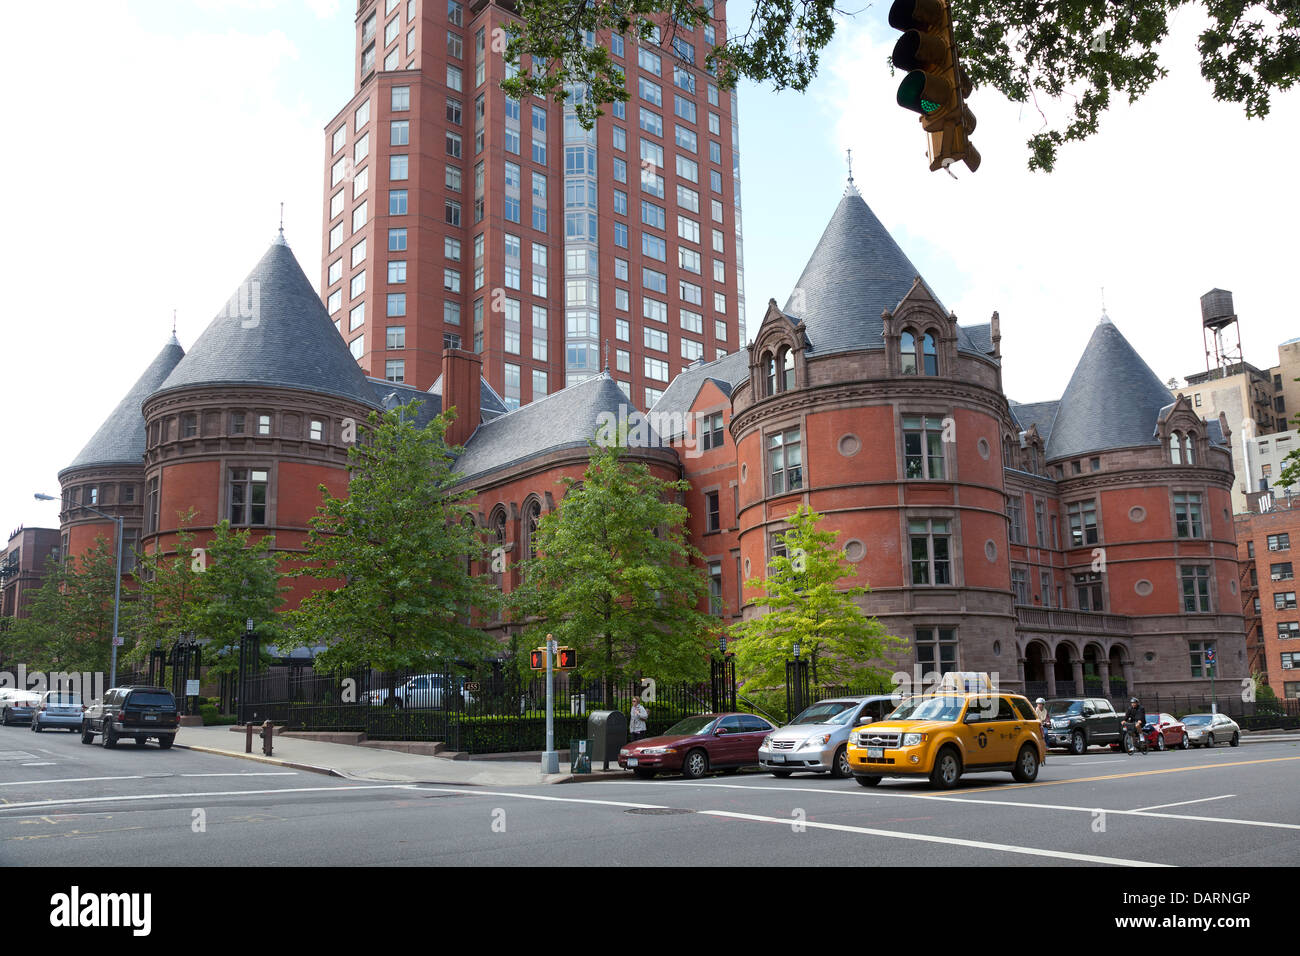 The former New York Cancer Hospital, now luxury condominiums in New York City Stock Photo